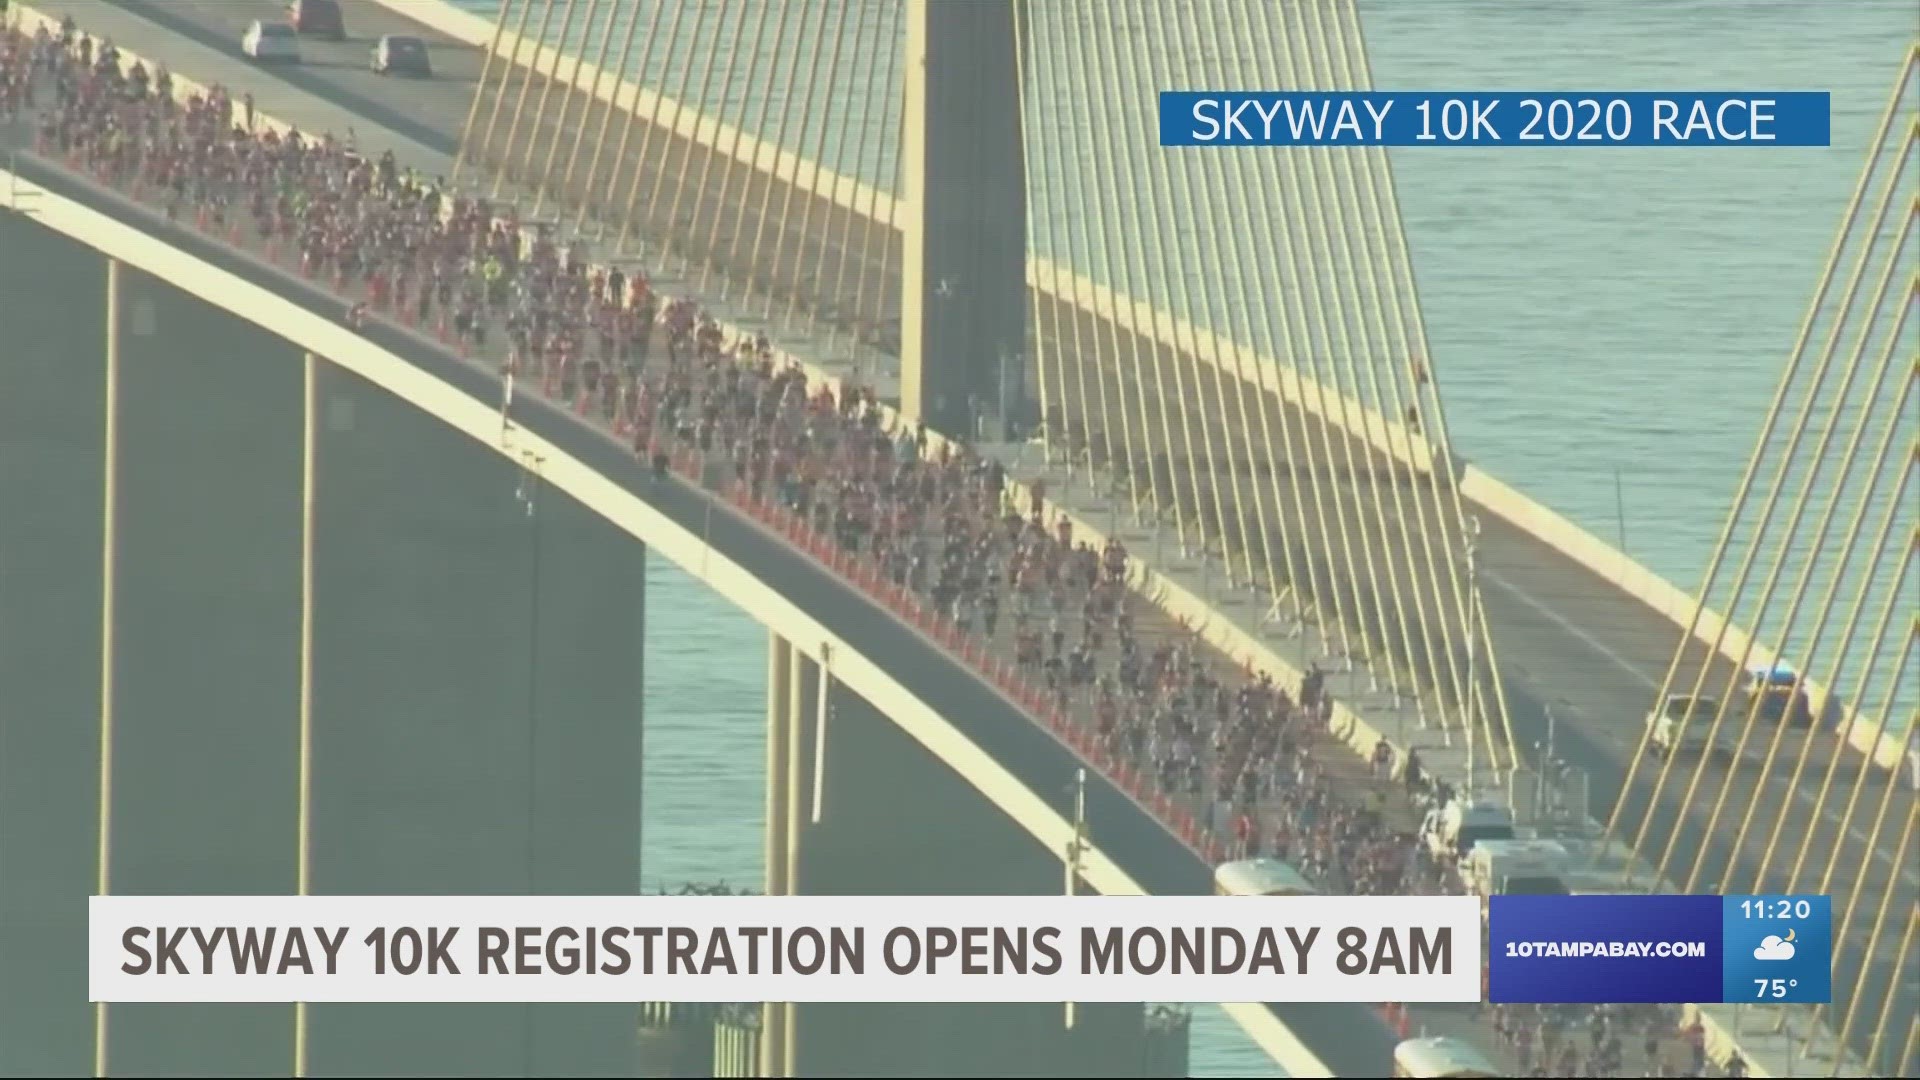 As soon as the registration goes live, you'll want to race over to Skyway10K.com. The race is limited to 8,000 runners and spots go fast.